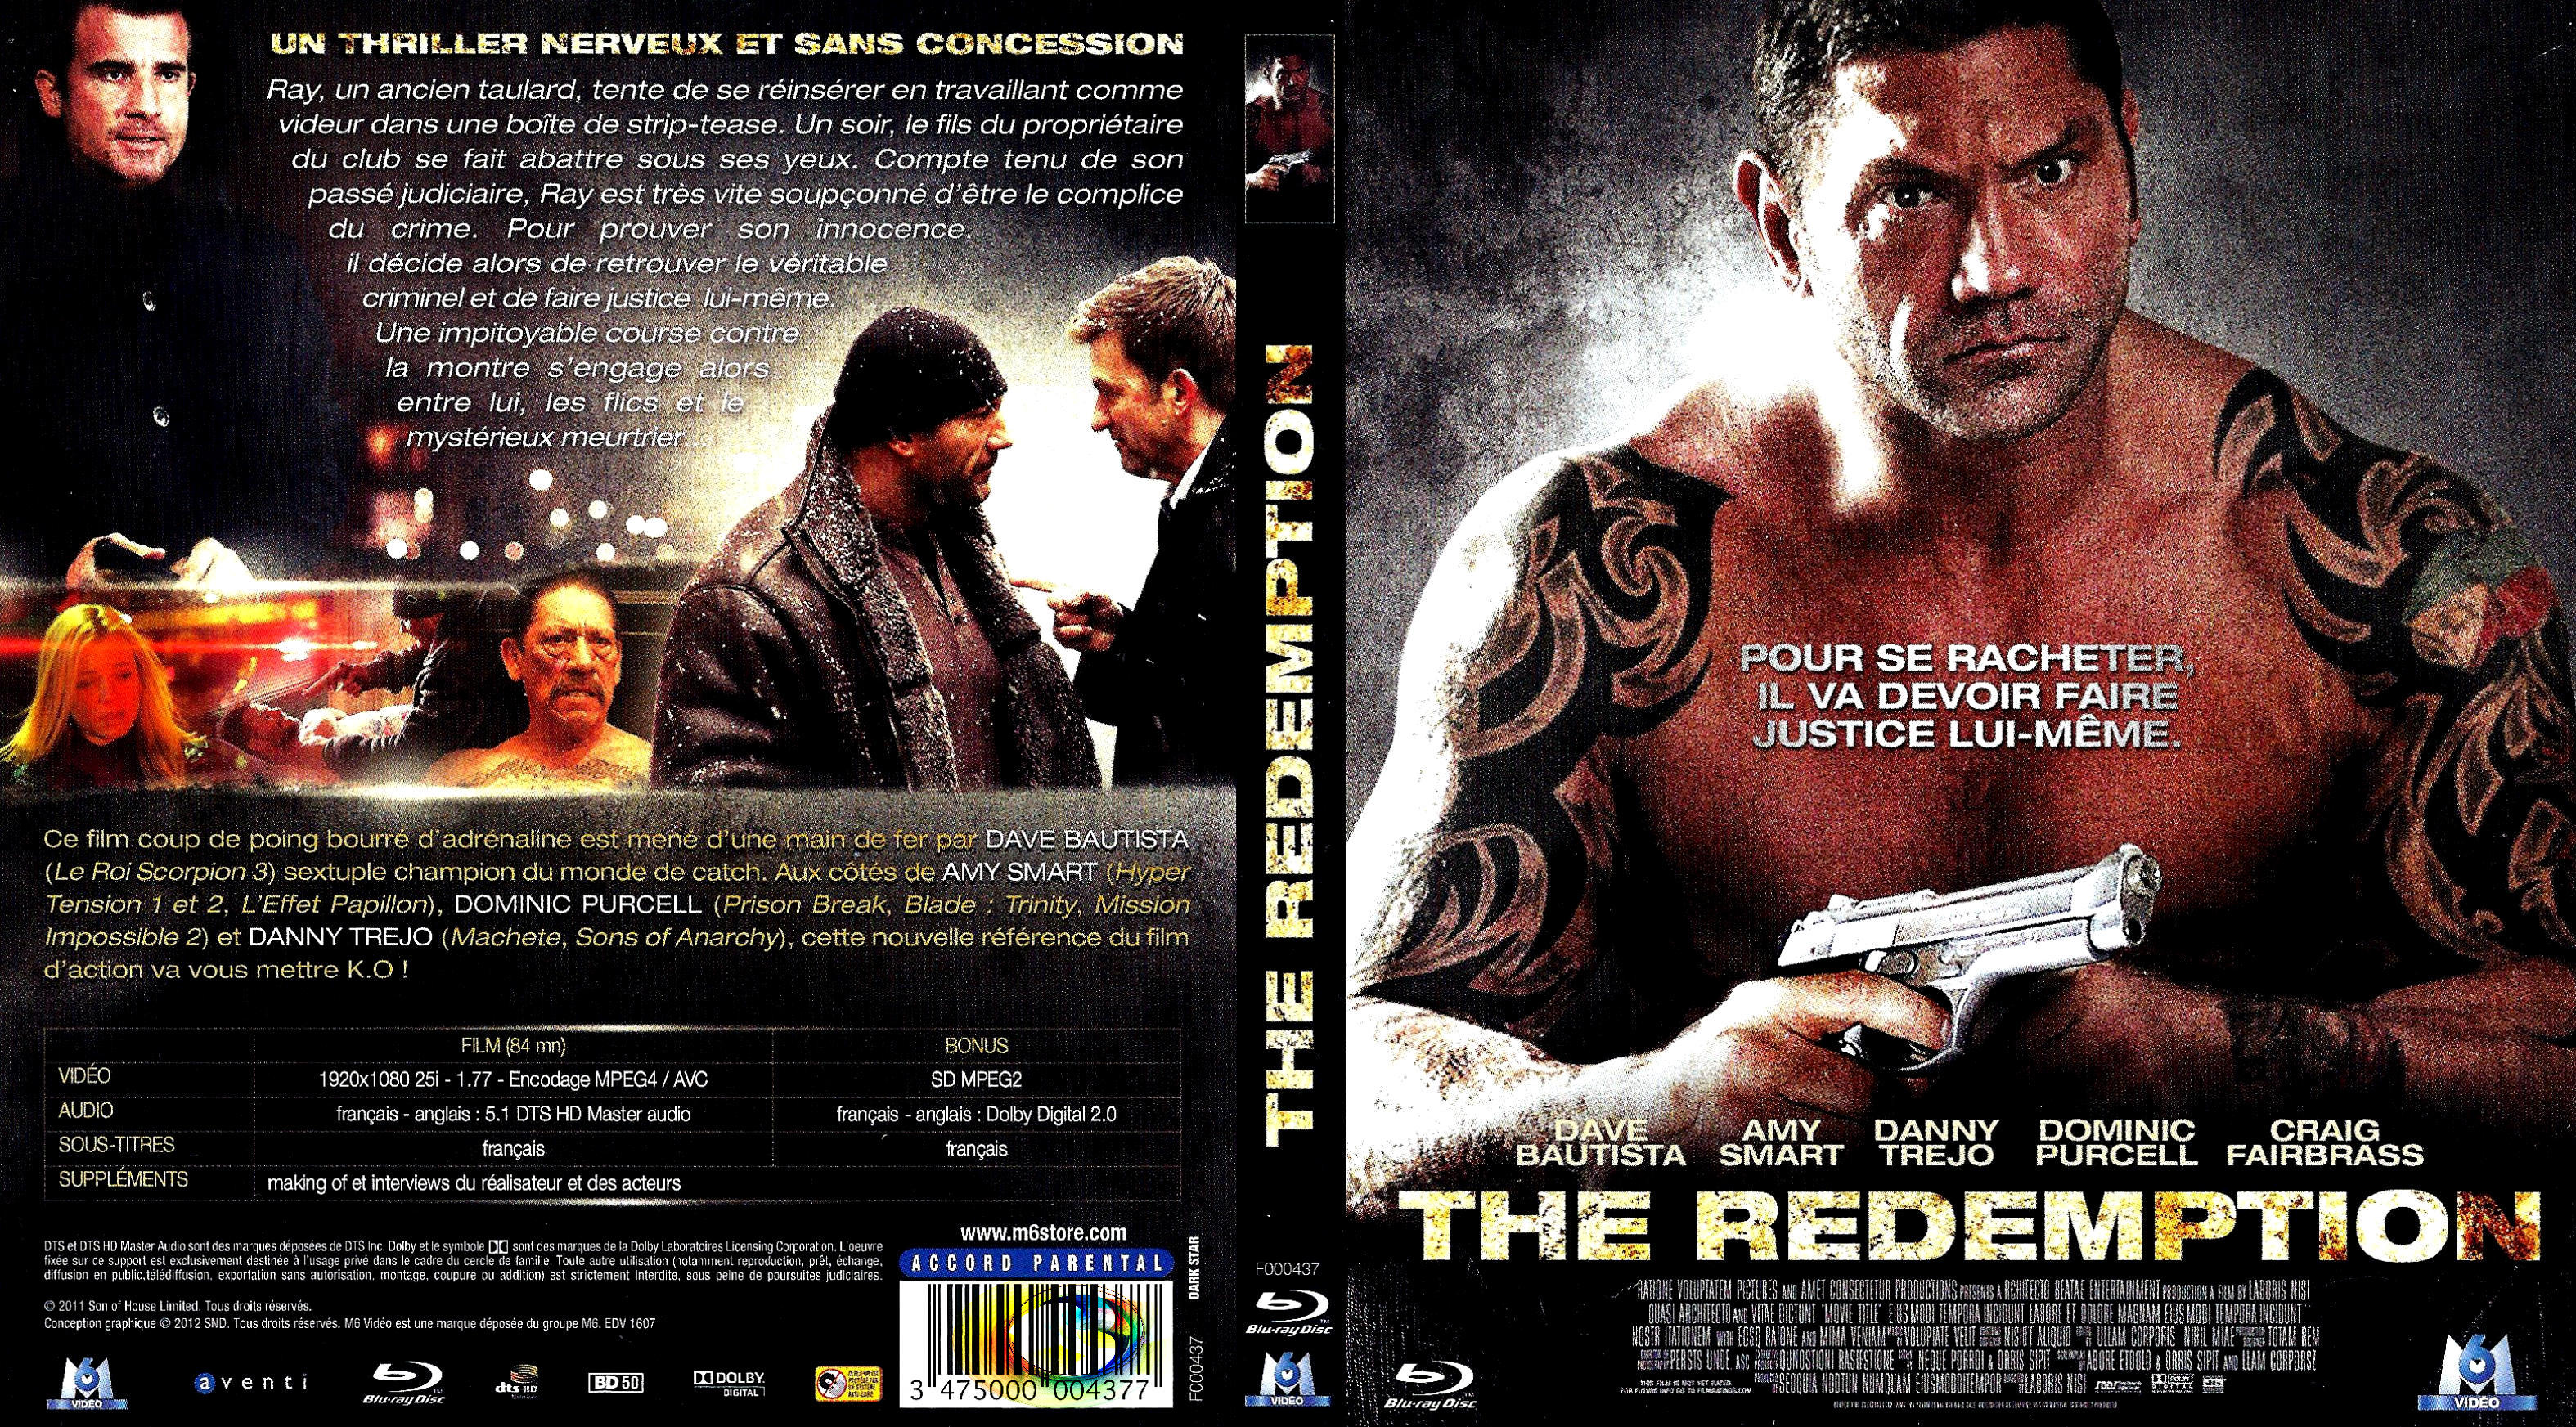 Jaquette DVD The redemption (BLU-RAY)